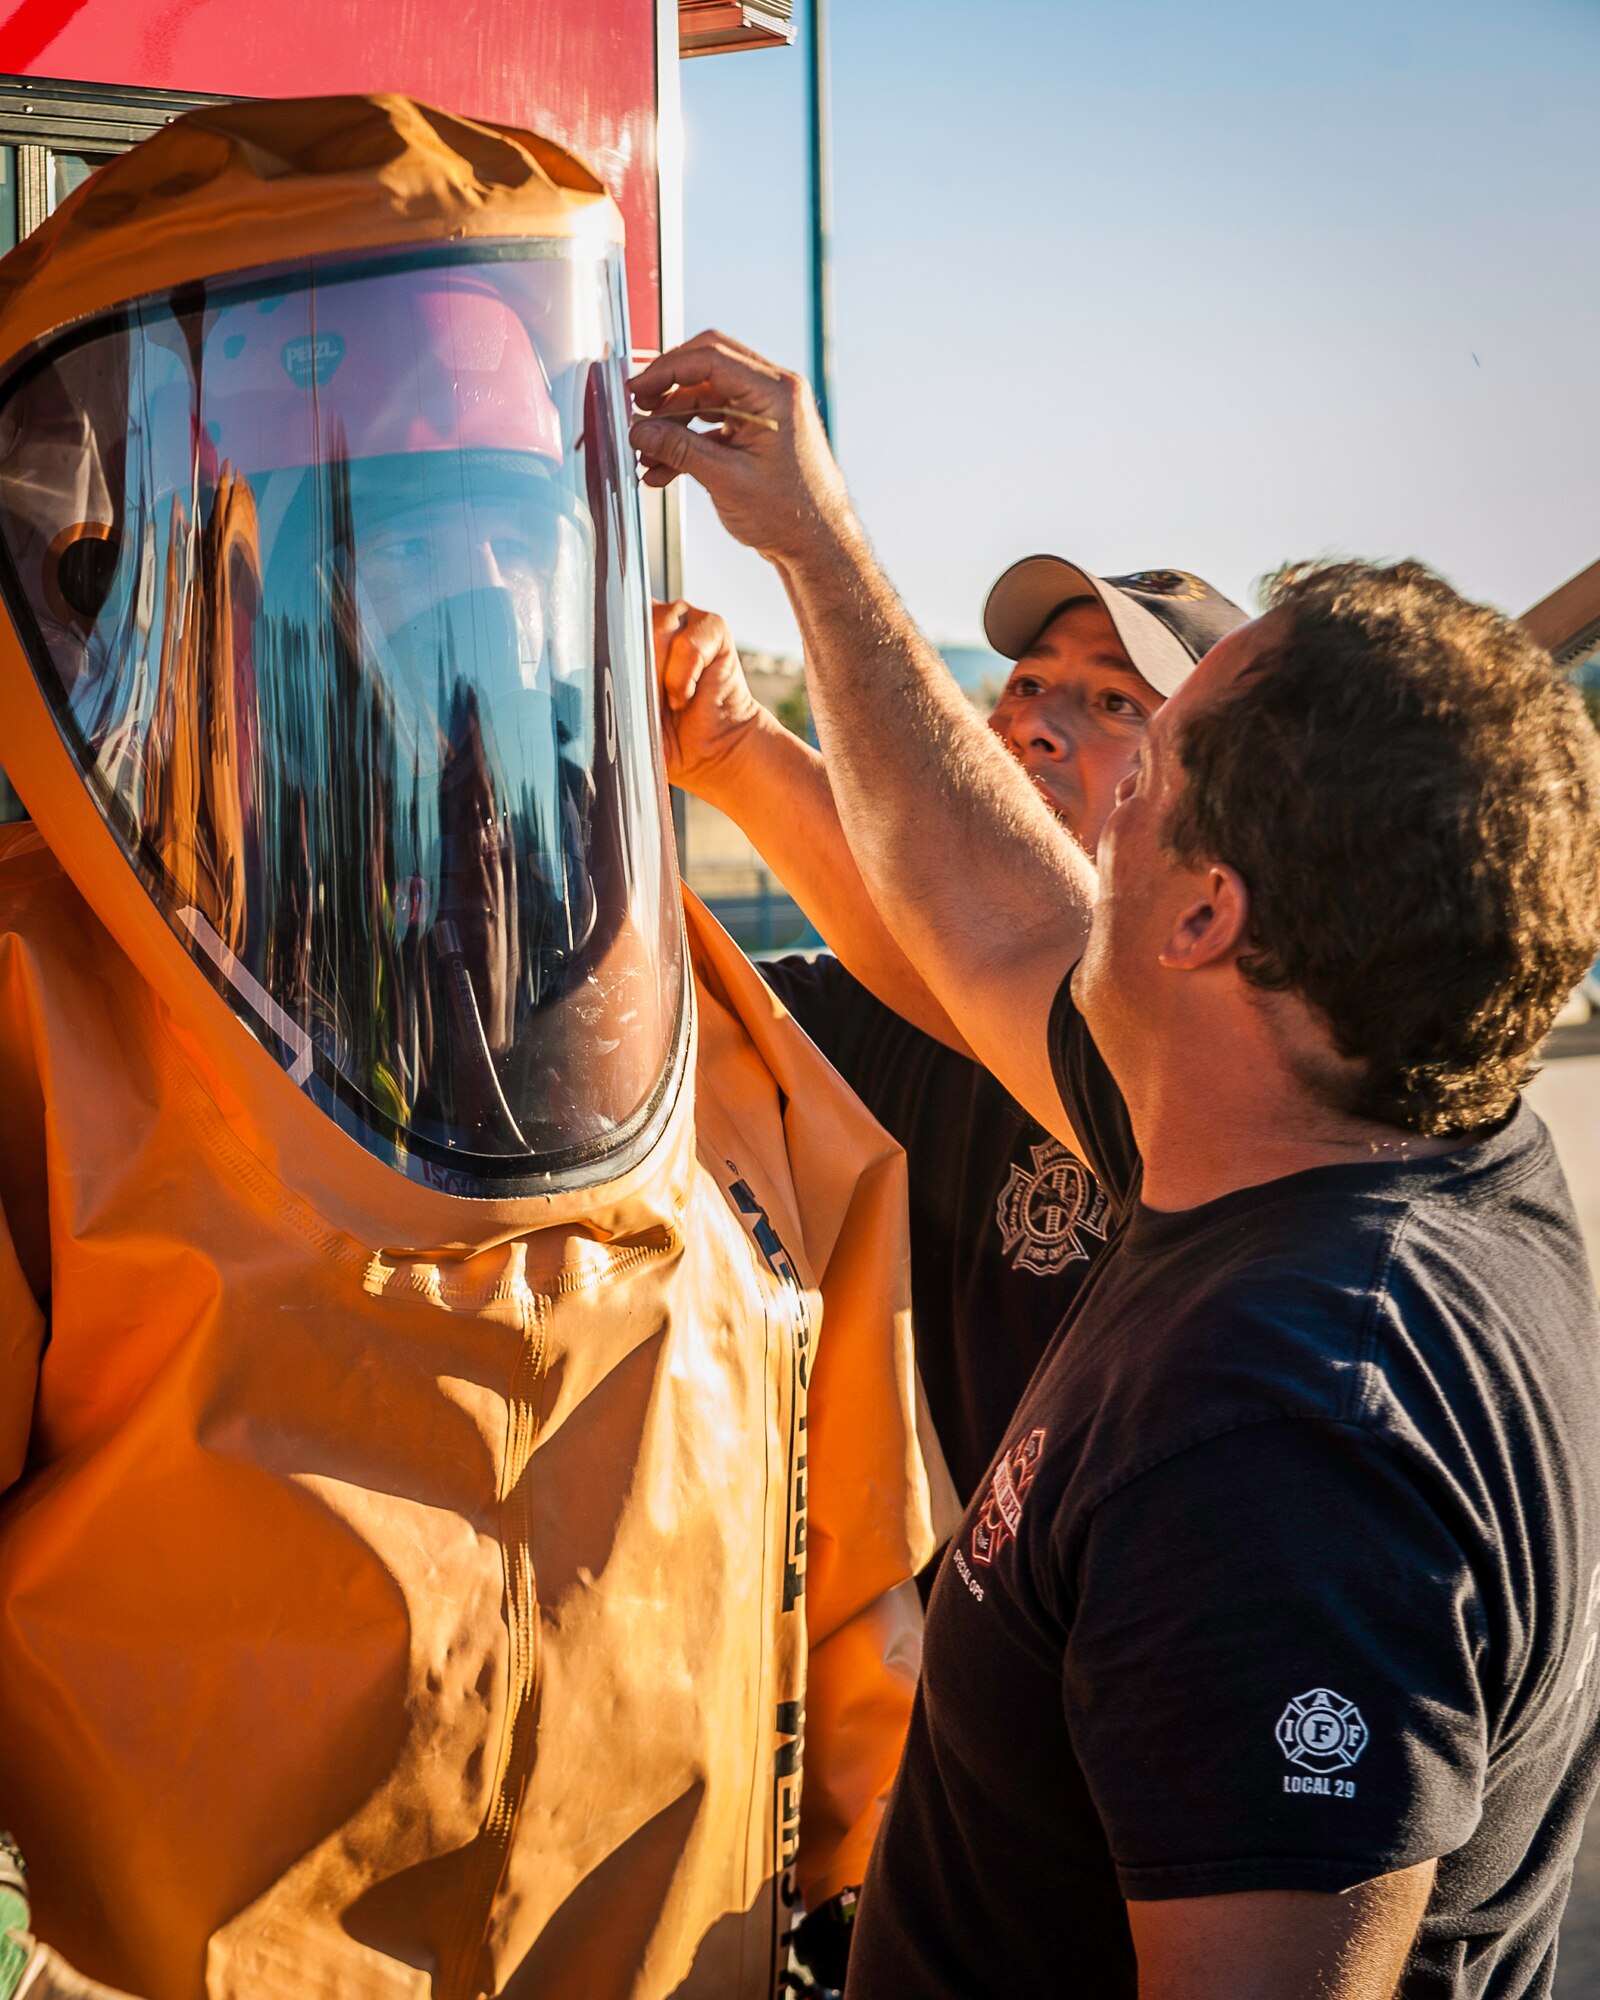 Craig Sayler gets his hazardous material suit checked before joining other regional firefighters in the spill zone of a hazardous materials incident Sept. 14, 2014, near the Washington-Idaho state line. A tanker truck leaking anhydrous trimethylamine, a flammable substance used in making solvents, animal feed supplements and products consumed by the paper, oil and gas industries, prompted emergency responders to shut down Interstate 90 garnering immense regional response including Fairchild Air Force Base firefighters. Sayler is a 92nd Civil Engineer Squadron firefighter. (U.S. Air Force photo/Staff Sgt. Benjamin W. Stratton)